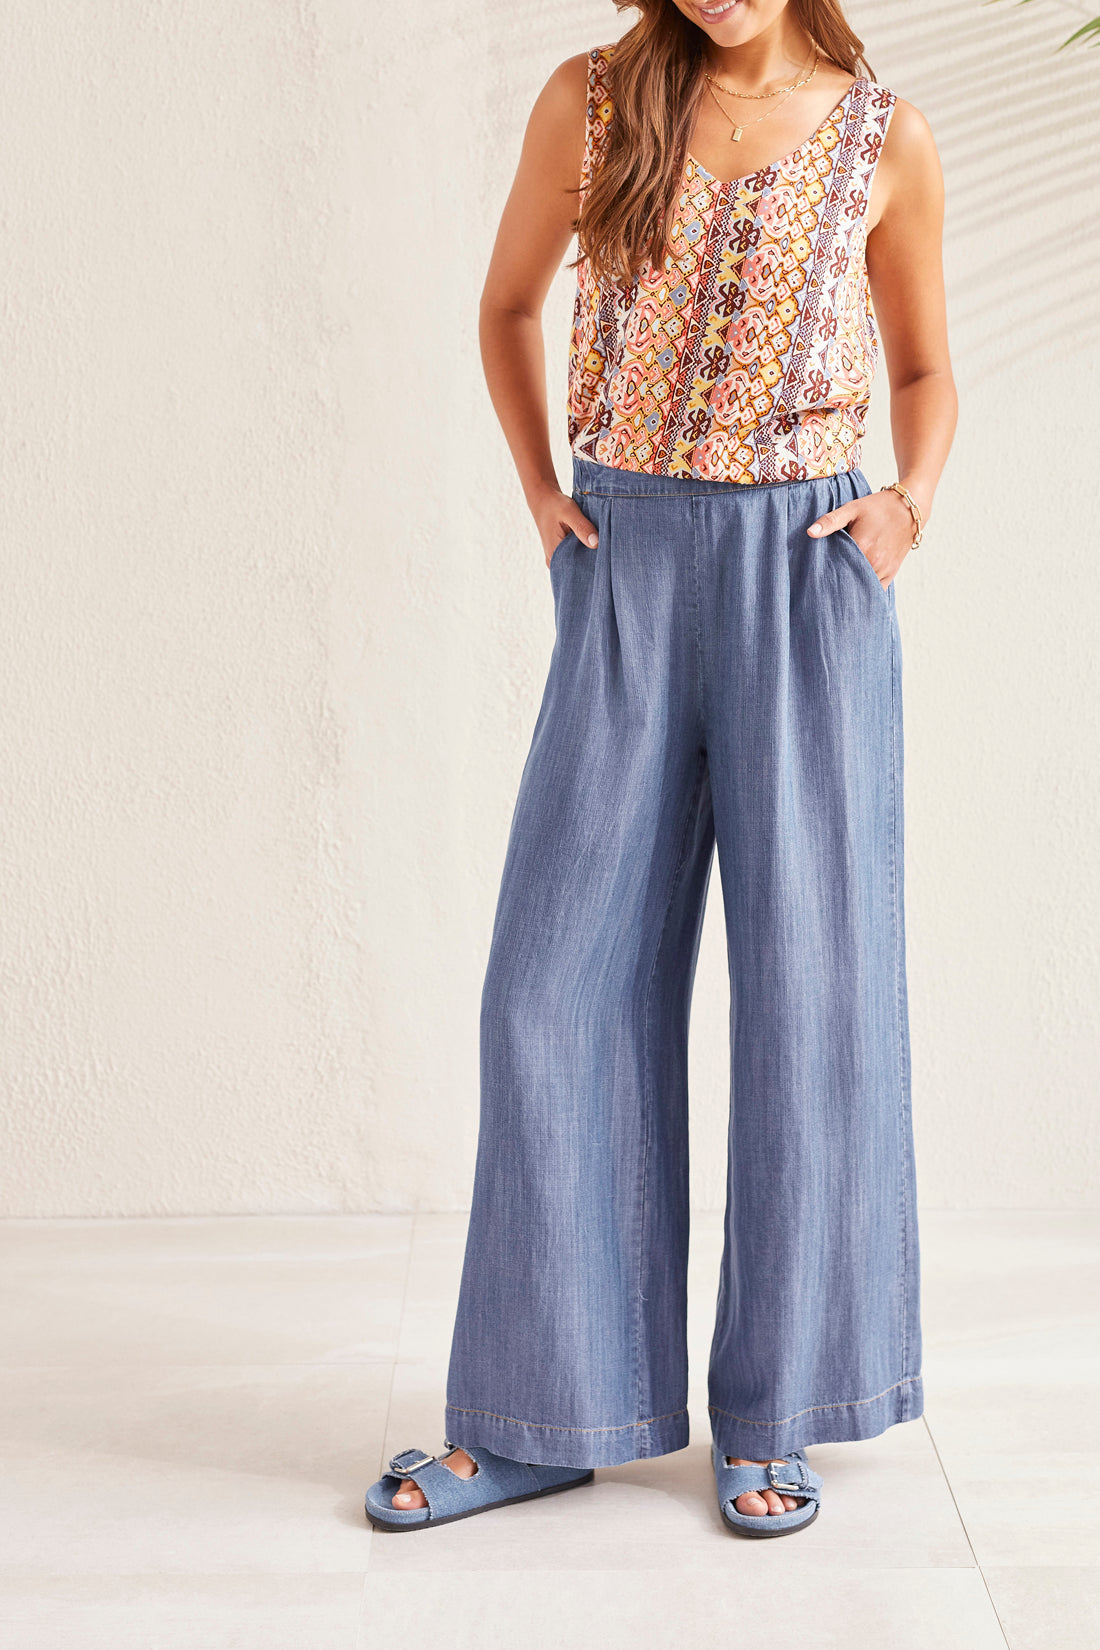 Flowy Pull on Wide Leg Pant with Pockets Tribal Strike The Pose